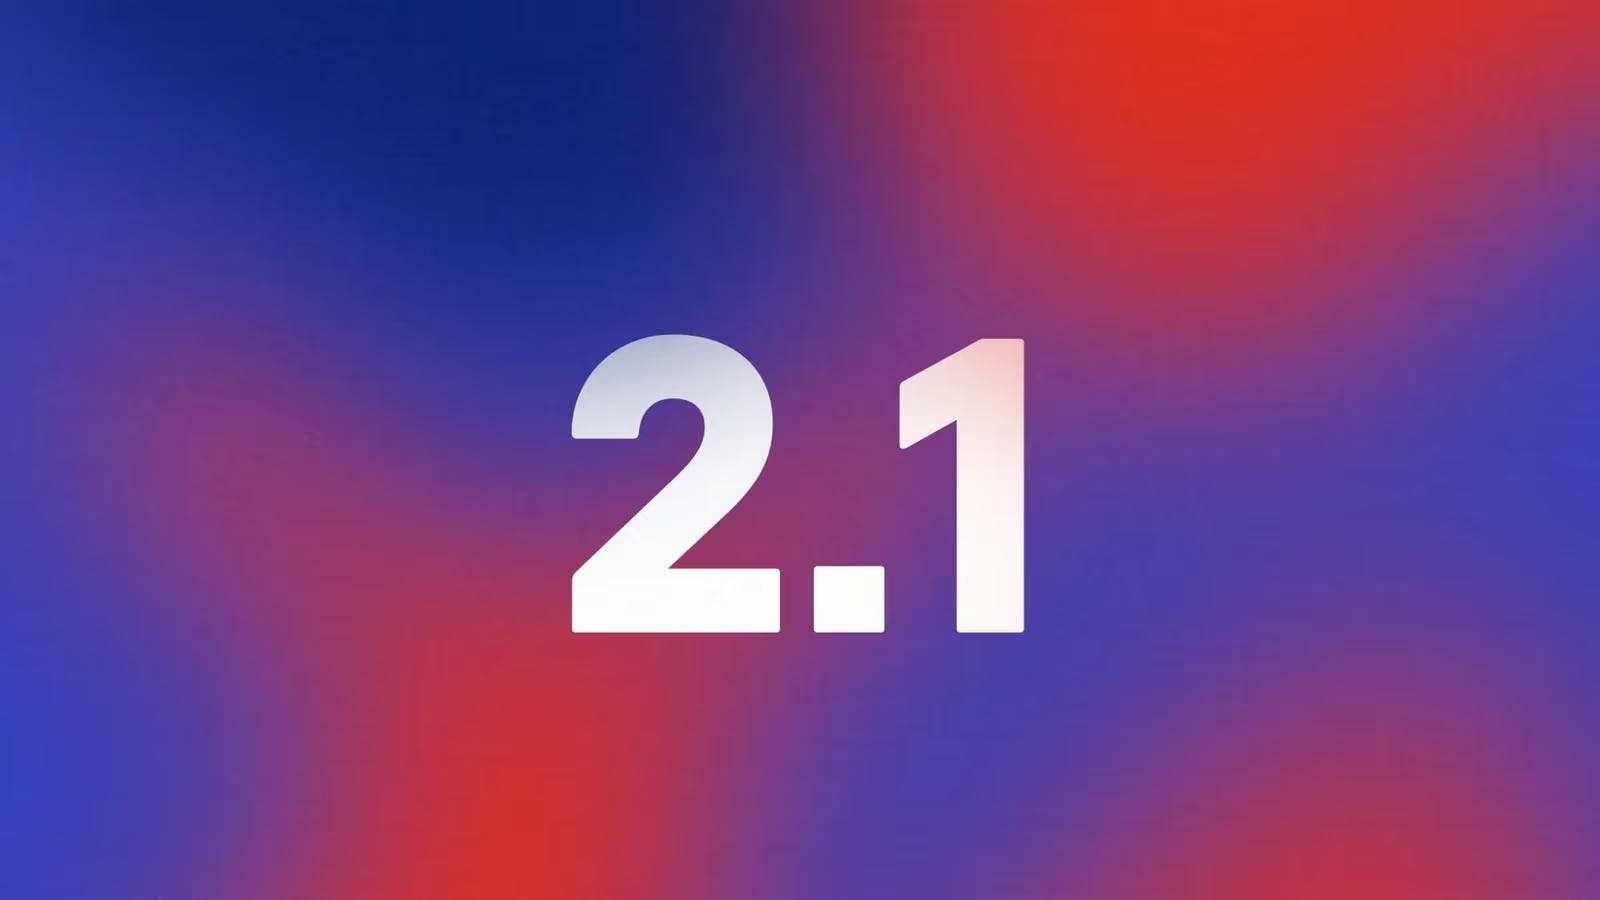 An image of with colorful red and blue gradients with the text 2.1